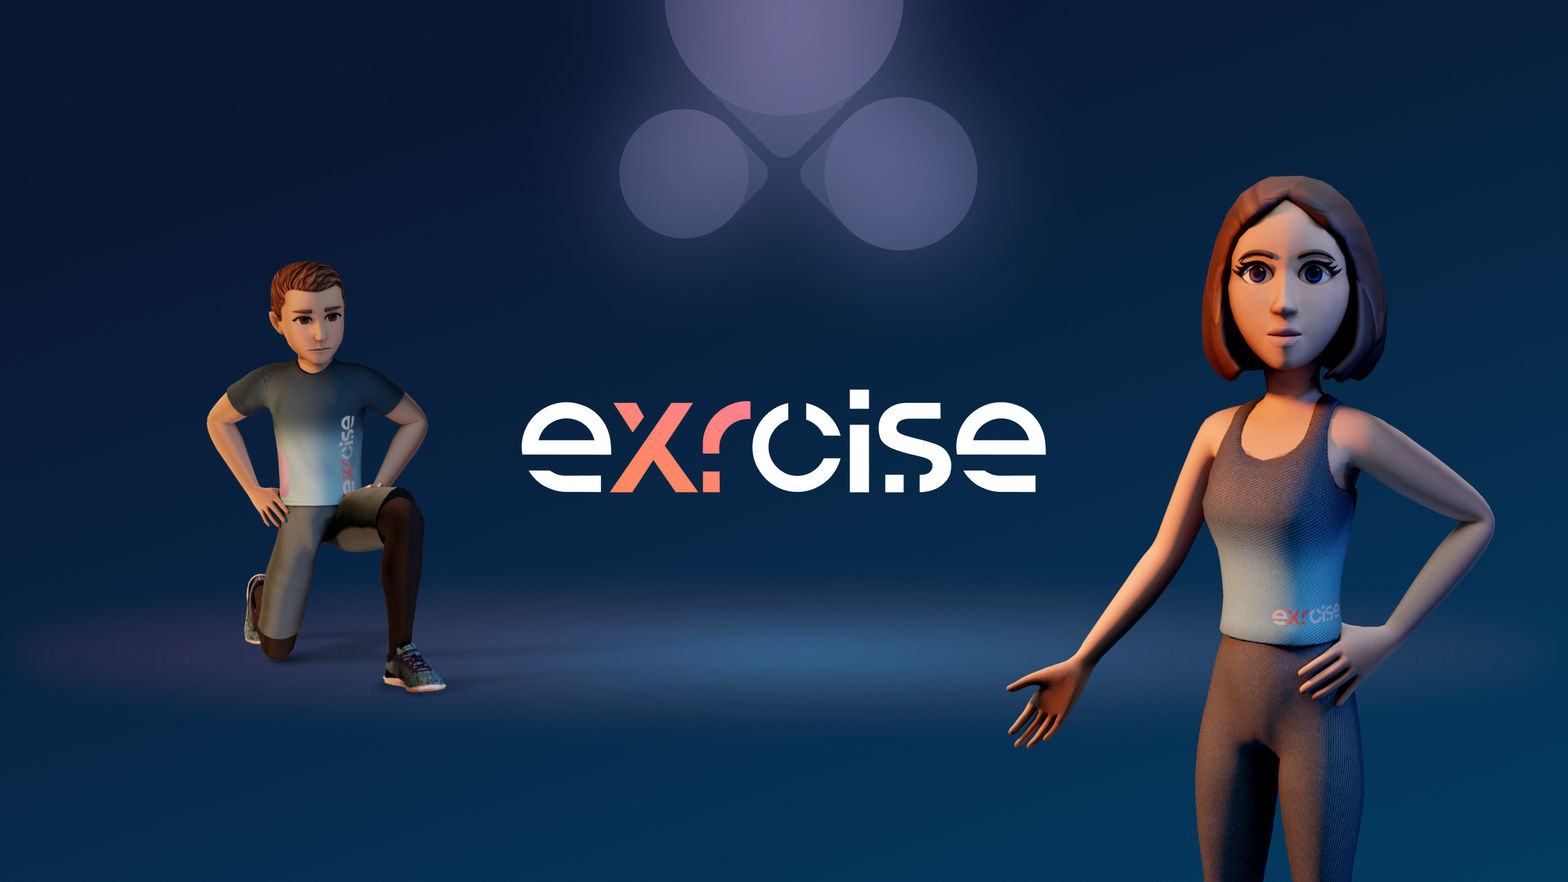 eXRcise